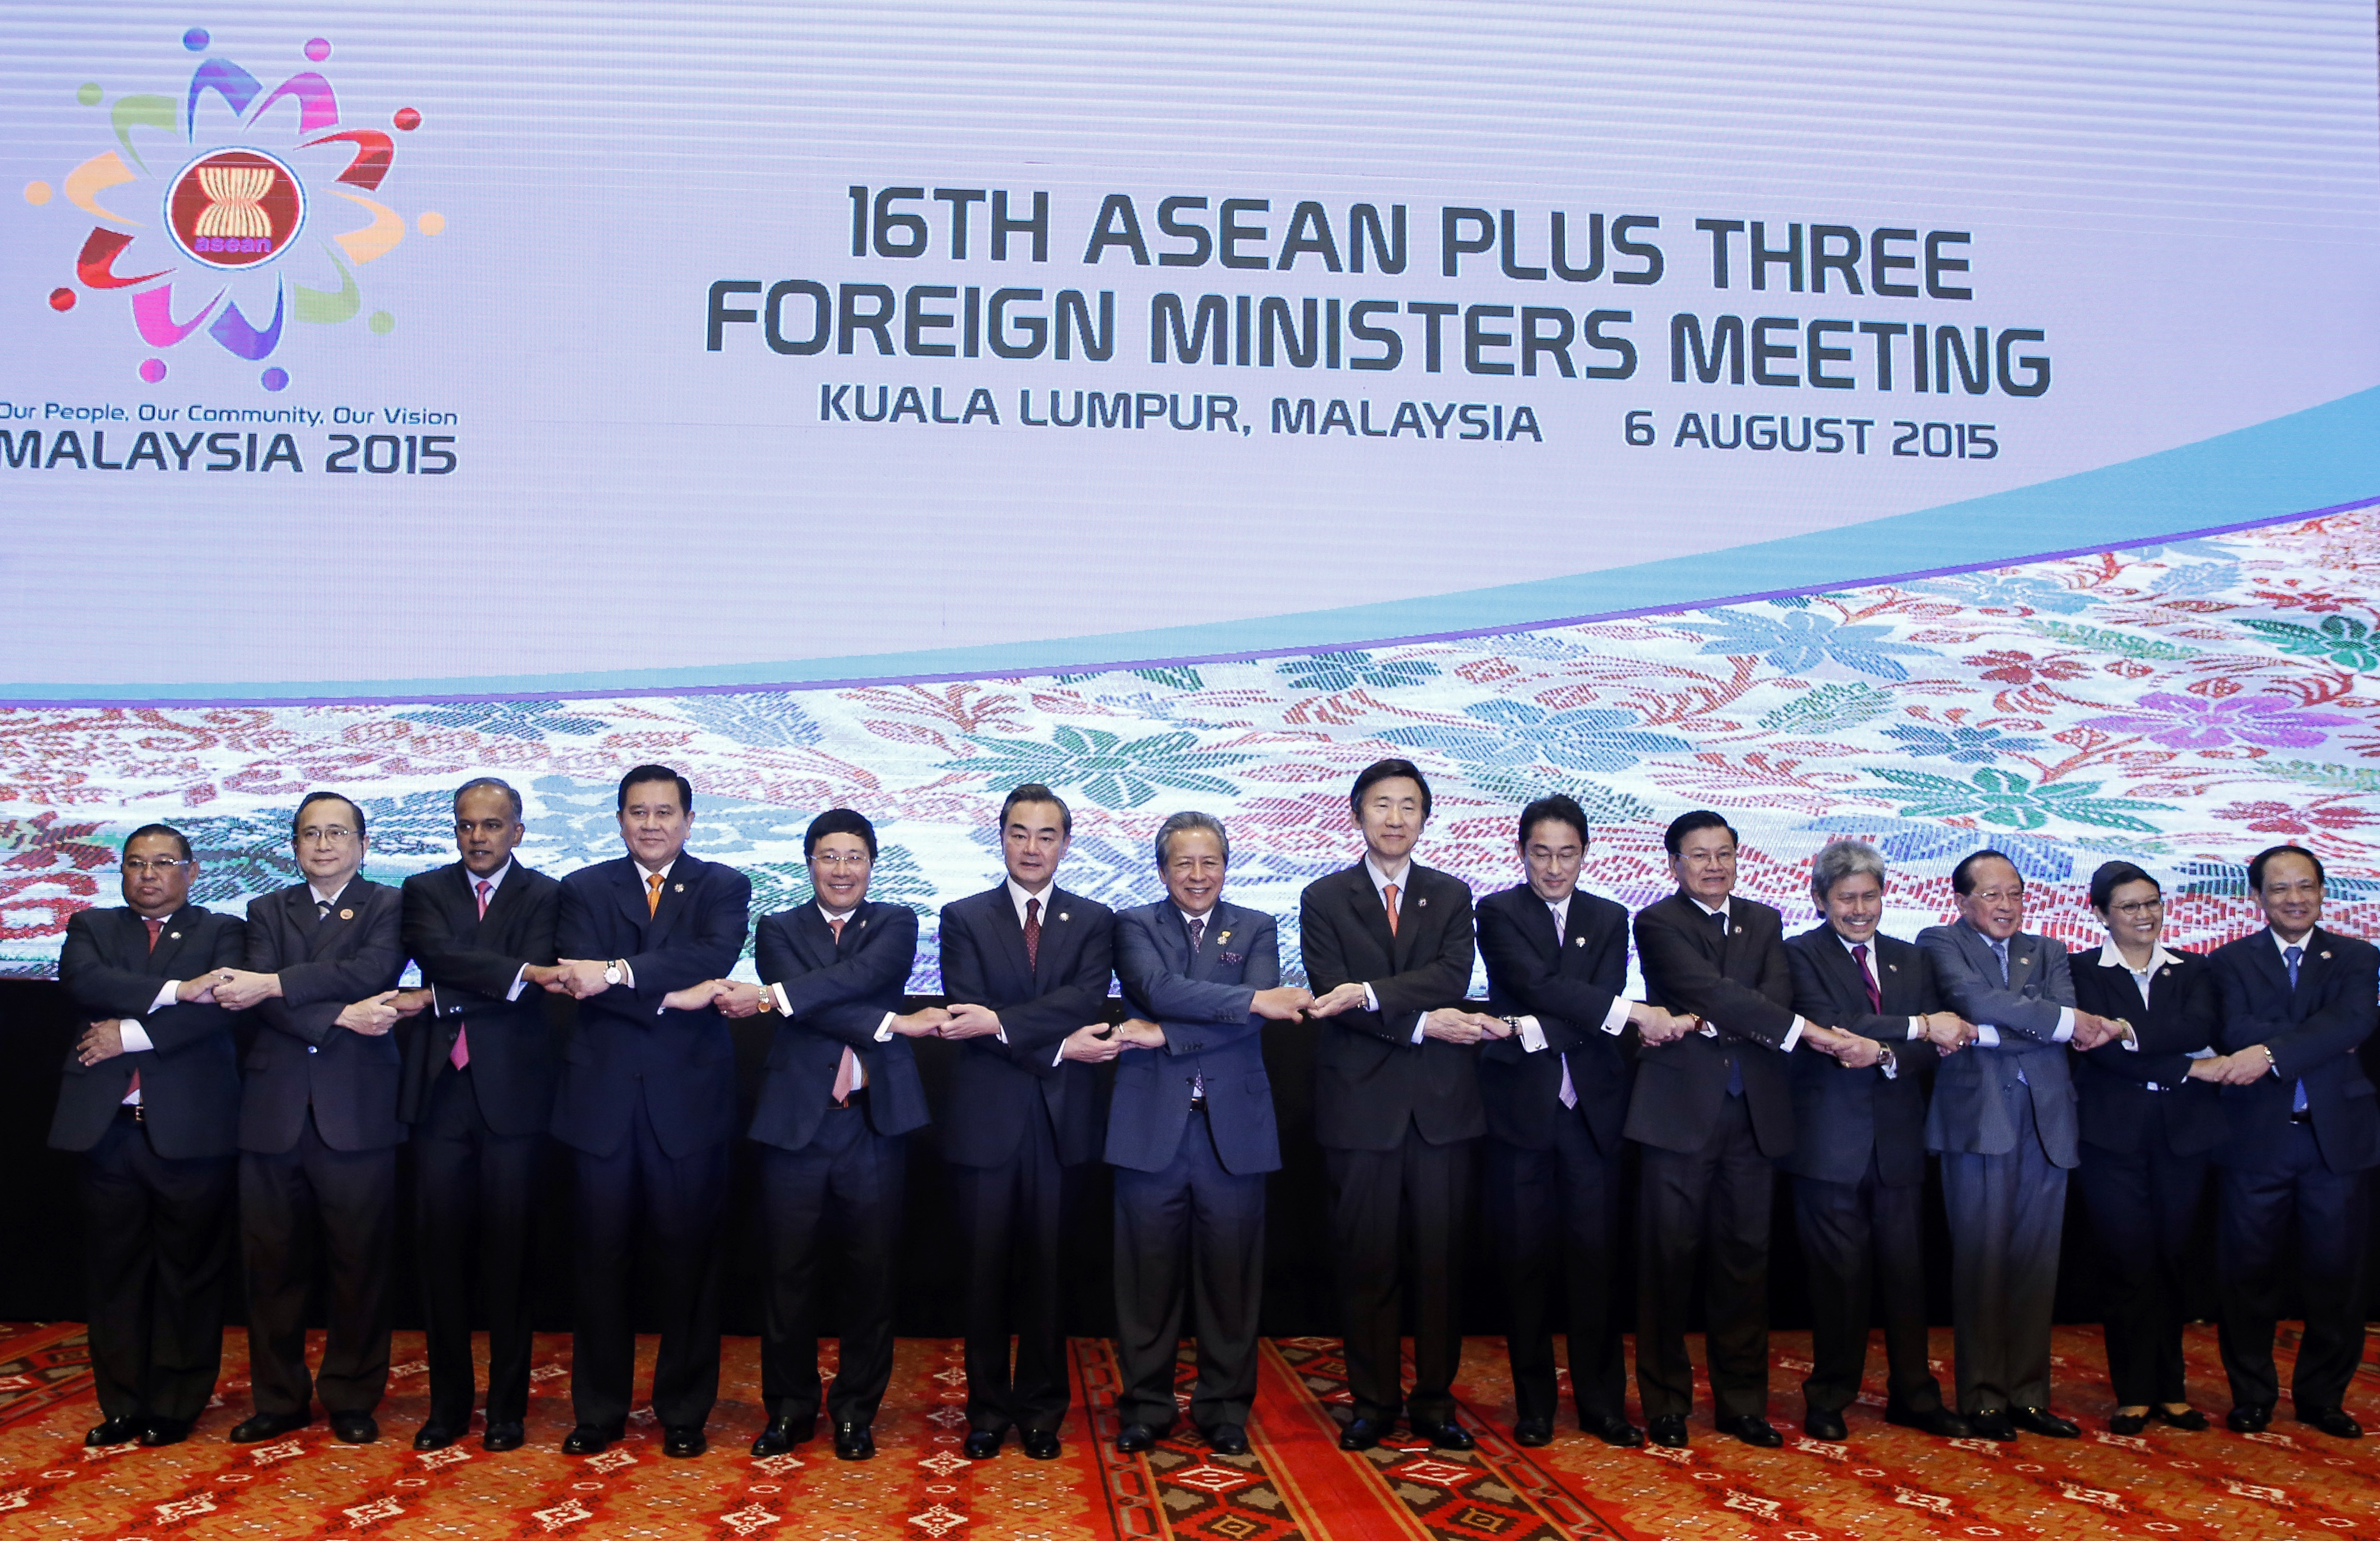 (left to right) In this August 6, 2015 file photo, Myanmar's Foreign Minister Wunna Maung Lwin, Philippines's representative Evan Garcia, Singapore's Foreign Minister K. Shanmugam, Thailand's Foreign Minister Tanasak Patimapragorn, Vietnam's Foreign Minister Pham Binh Minh, China's Foreign Minister Wang Yi, Malaysia's Foreign Minister Anifah Aman, Republic of Korea's Foreign Minister Yun Byung-se, Japan's Foreign Minister Fumio Kishida, Laos's Foreign Minister Thongloun Sisoulith, Brunei's Foreign Minister Mohamed Bolkiah, Cambodia's Foreign Minister Hor Namhong, Indonesia's Foreign Minister Retno Marsudi, and ASEAN's Secretary General Le Luong Minh pose for a group photo before ASEAN Plus Three Foreign Ministers' Meeting in Kuala Lumpur, Malaysia. The dispute over the strategic waterways of the South China Sea has intensified, pitting a rising China against its smaller and militarily weaker neighbors who all lay claim to a string of isles, coral reefs and lagoons mostly in the Spratly and the Paracel islands. Photo: AP 